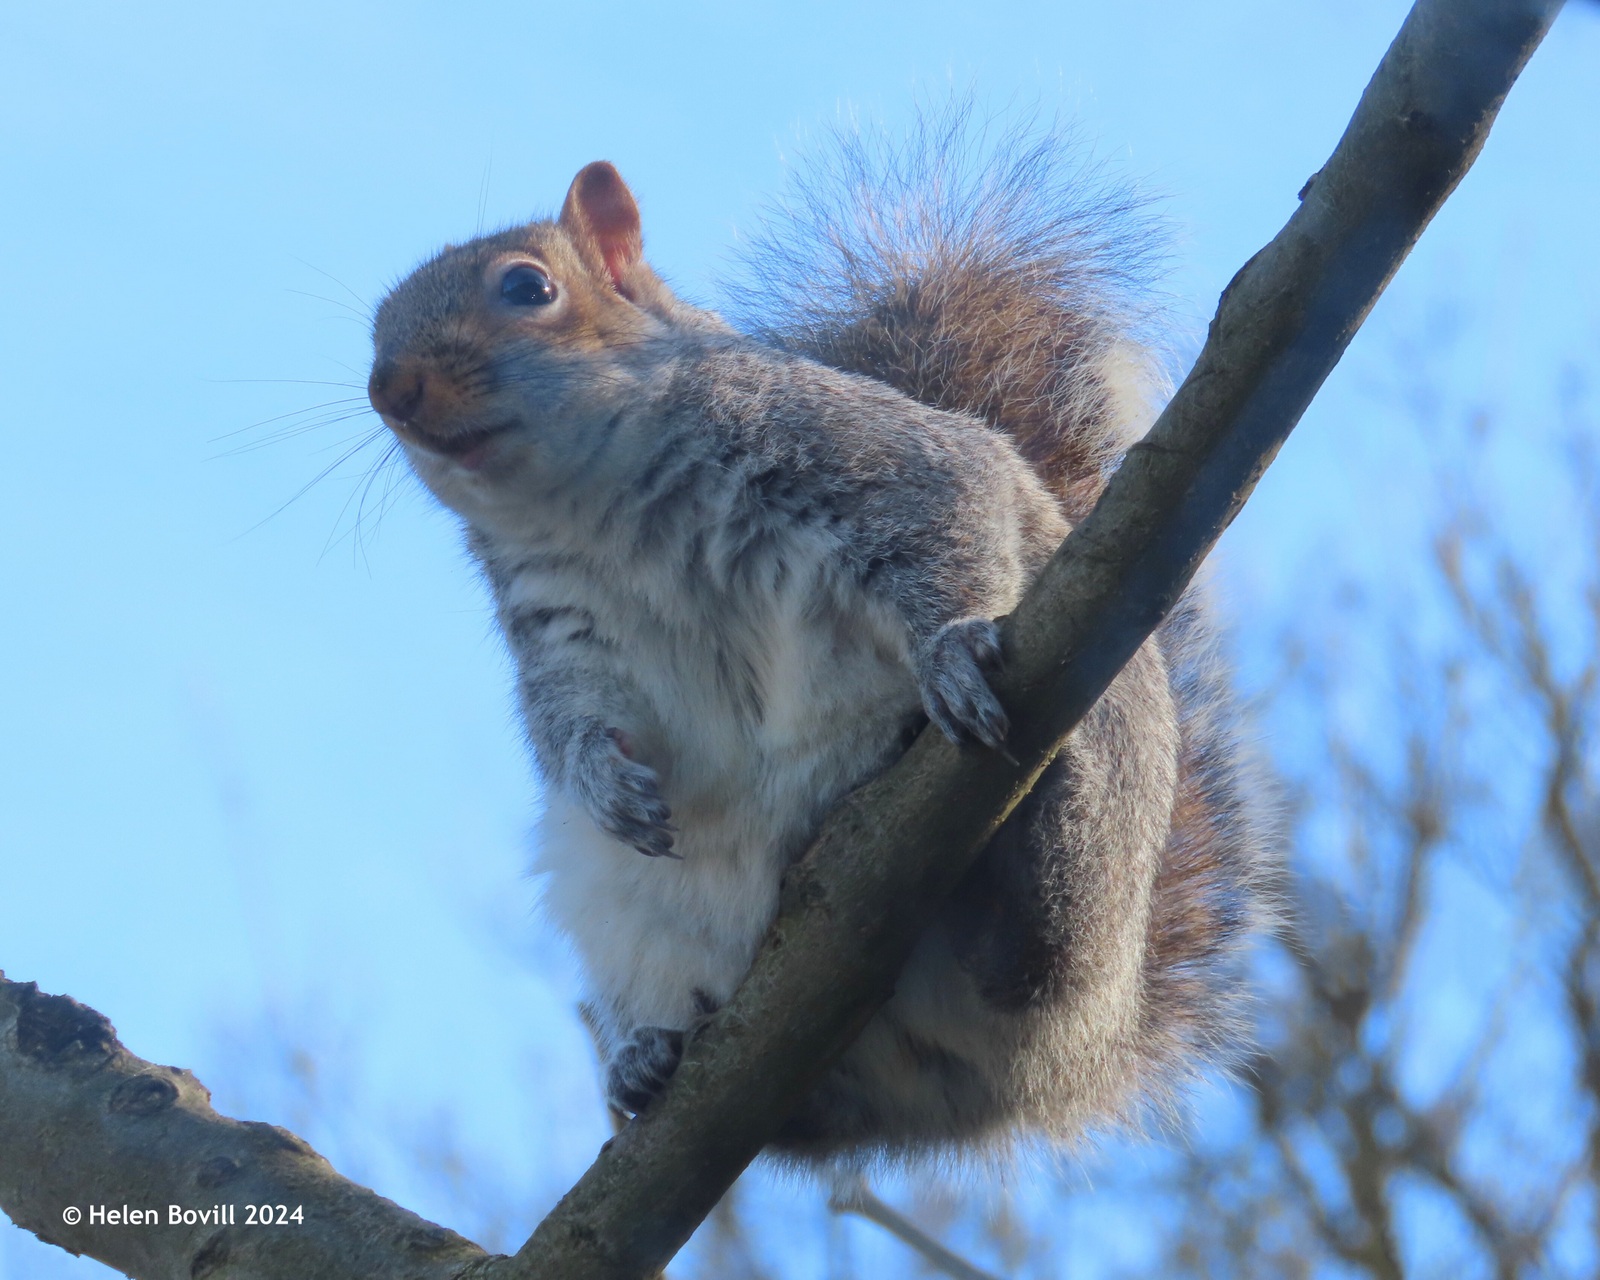 A grey squirrel in a tree, with blue sky in the background